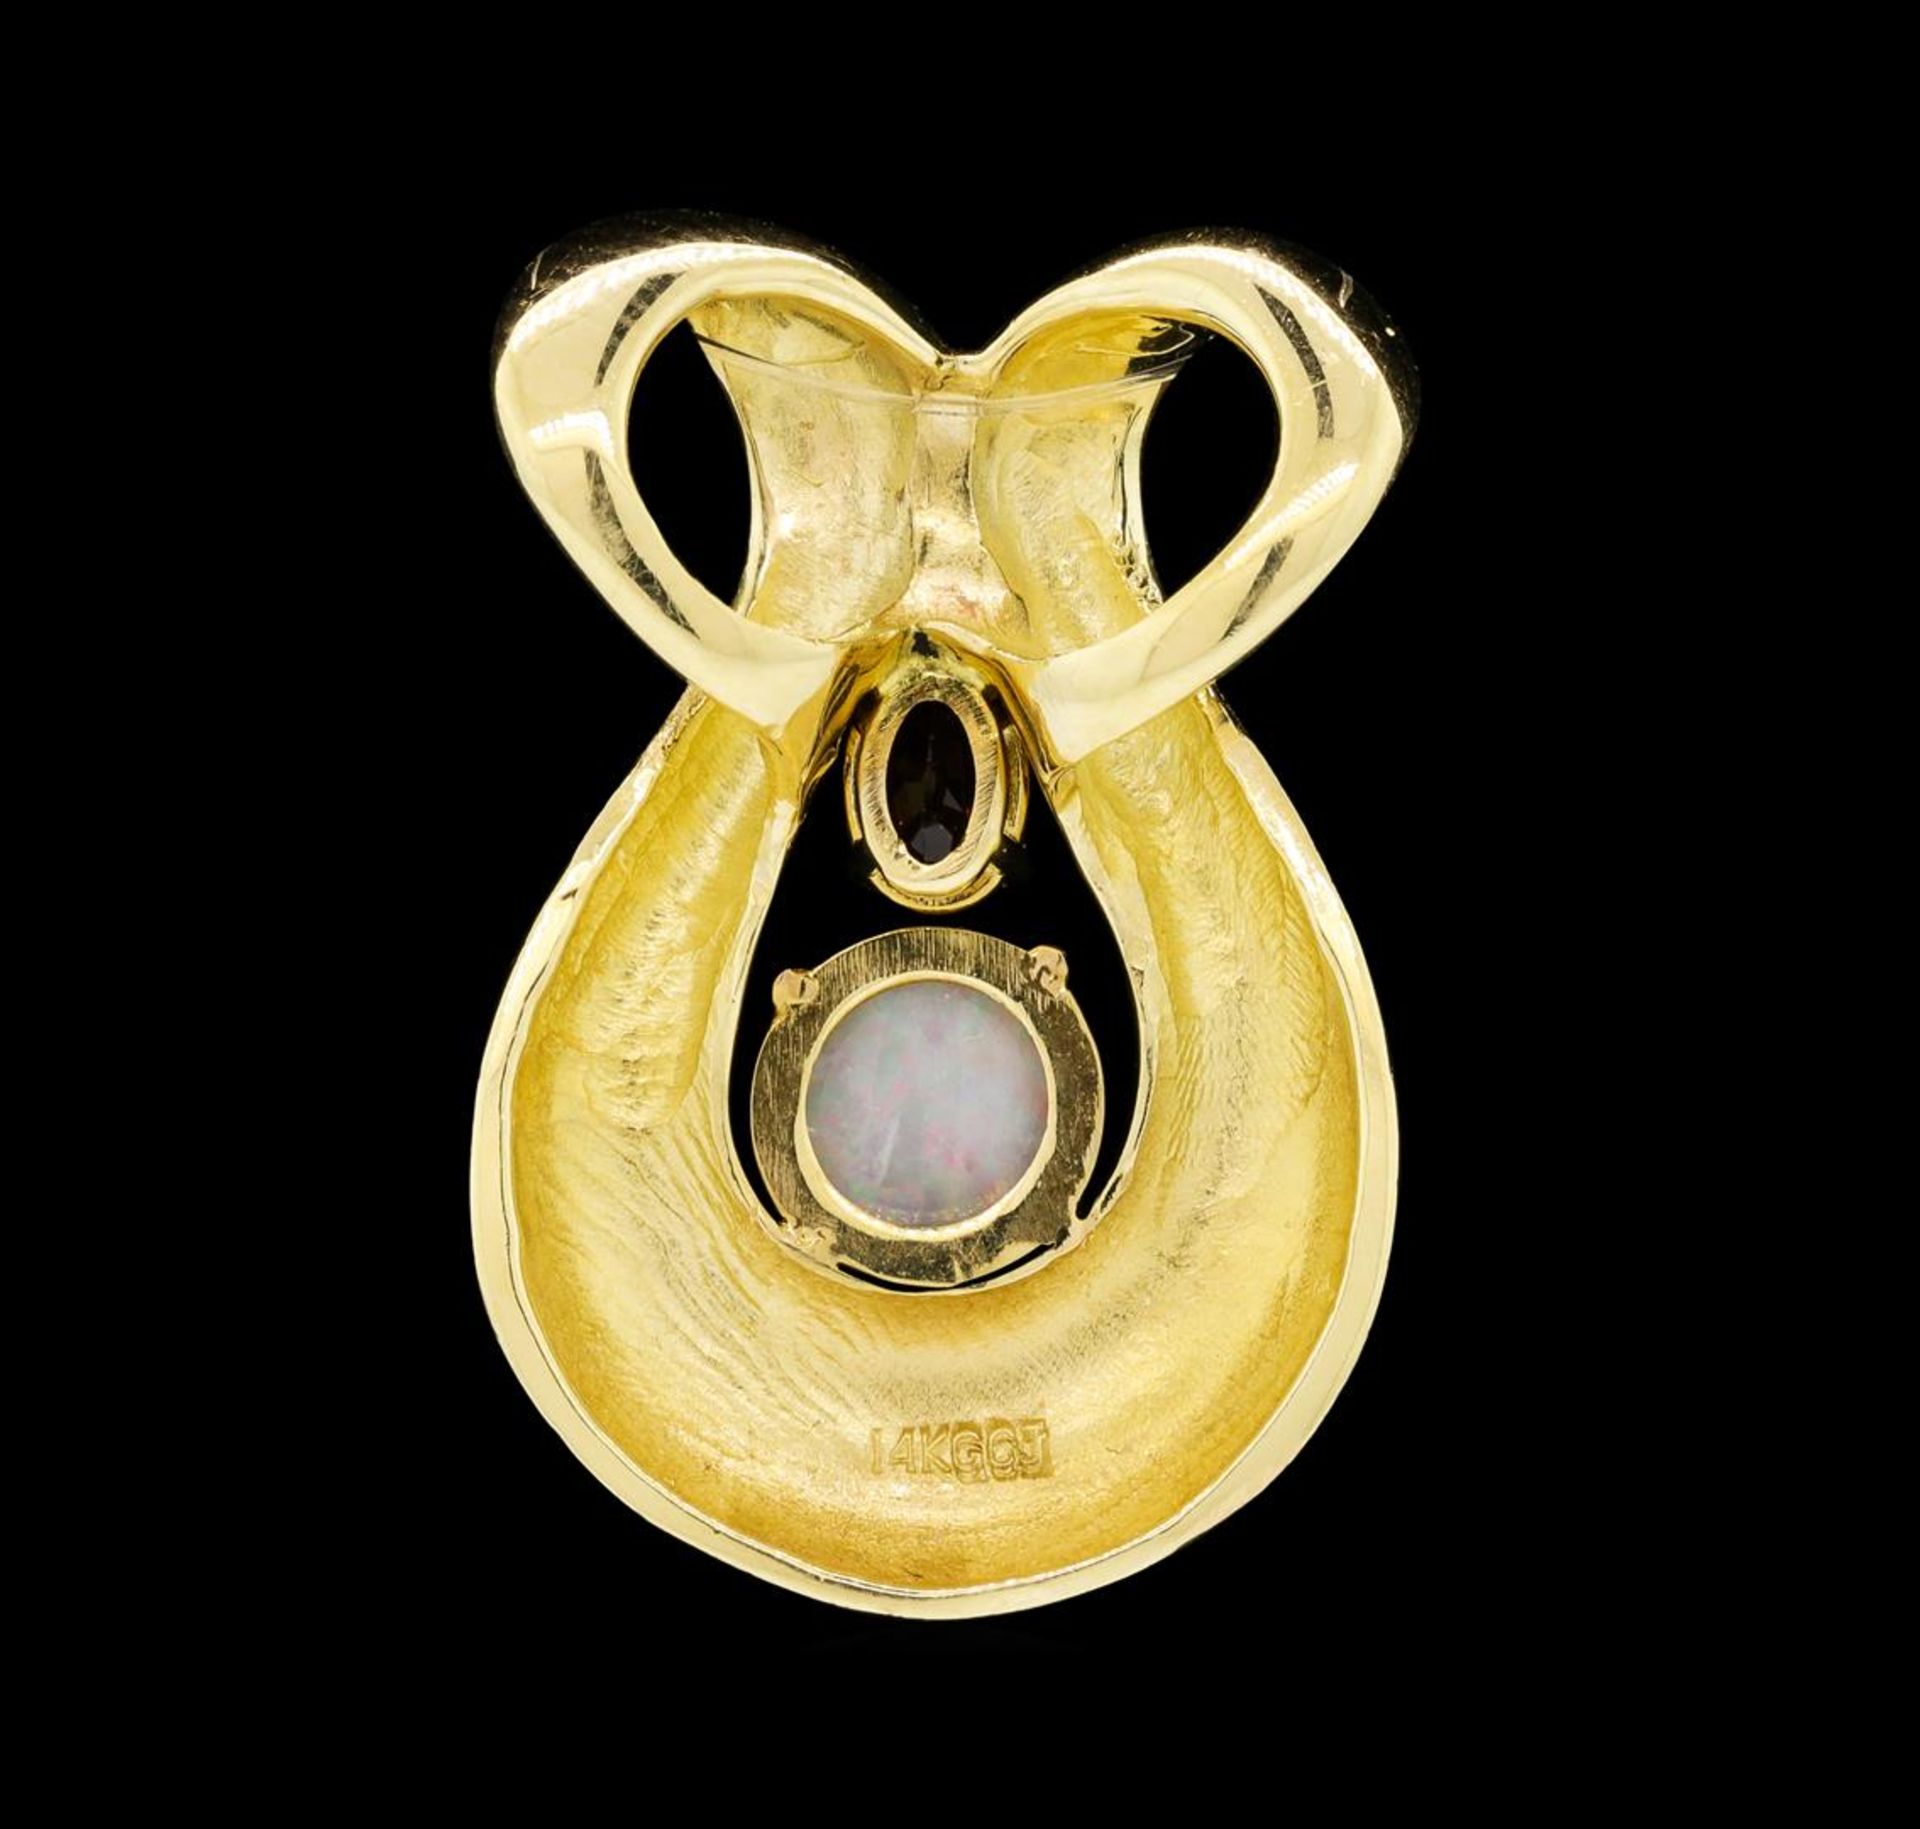 1.40 ctw Opal and Pyrope Garnet Slide Pendant - 14KT Yellow Gold - Image 2 of 3